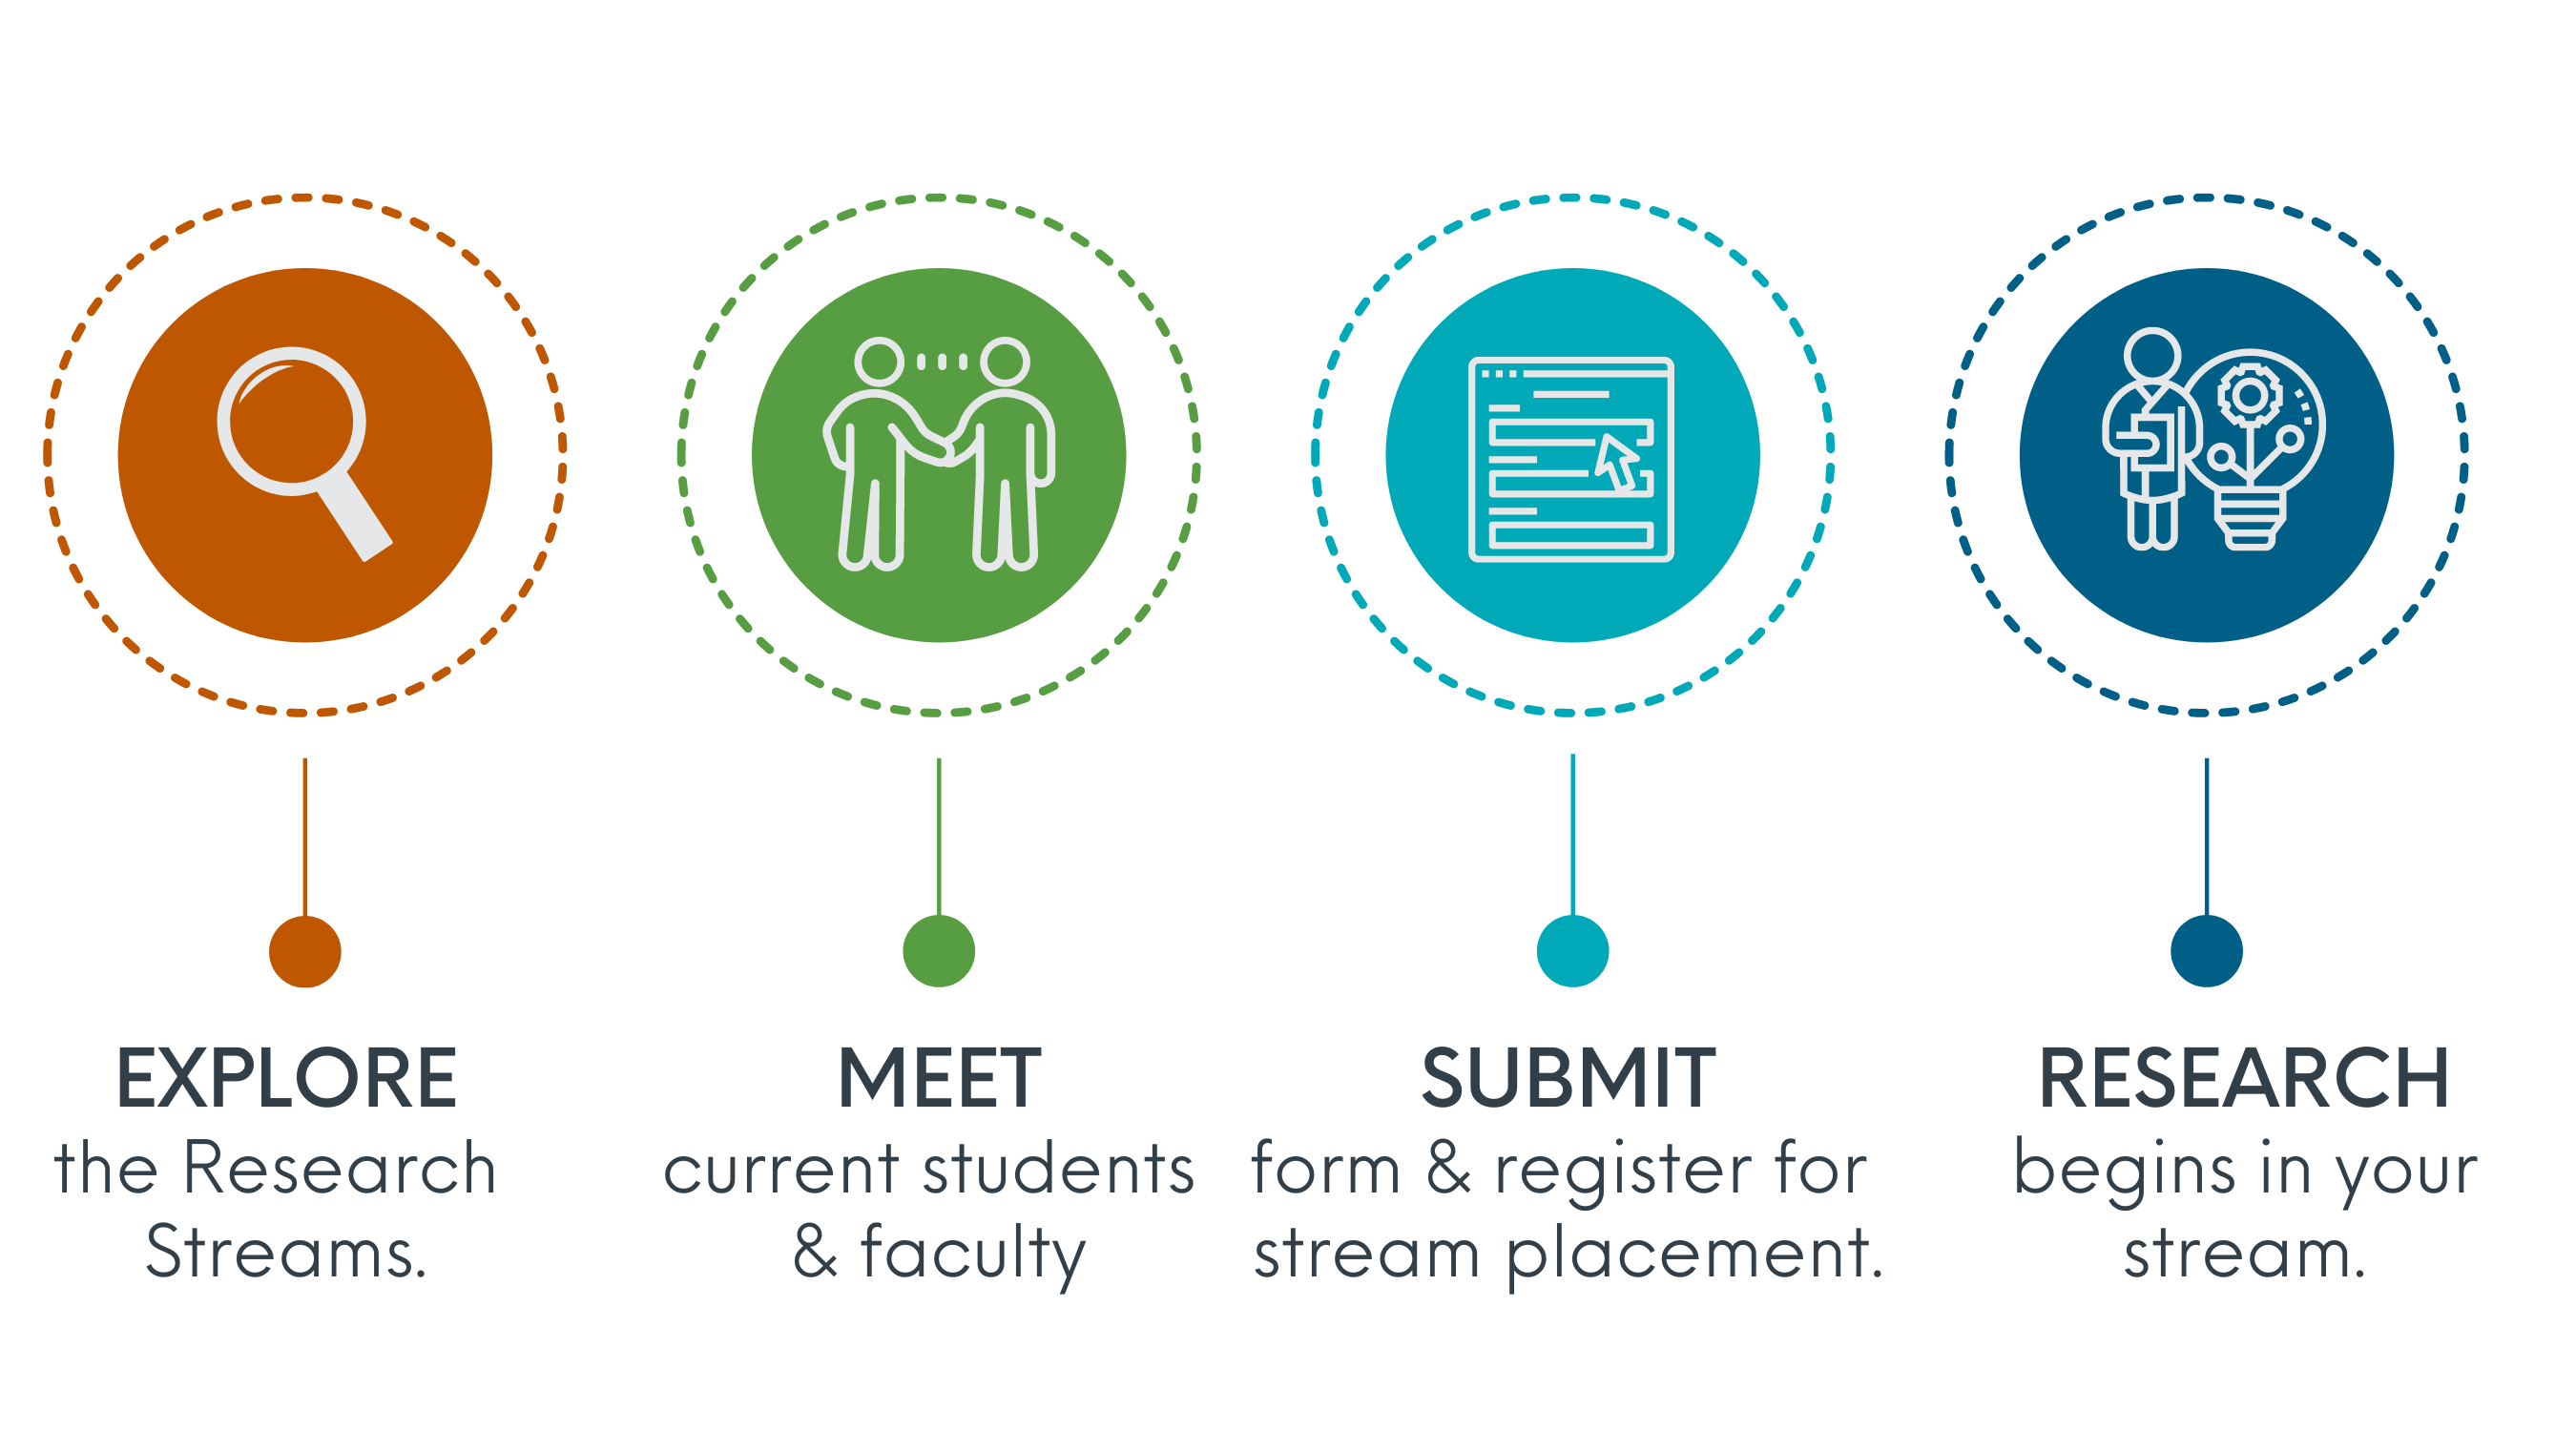 1. Explore the research streams. 2. Meet current students and faculty. 3. Submit form & register for stream placement. 4. Research begins in your stream.